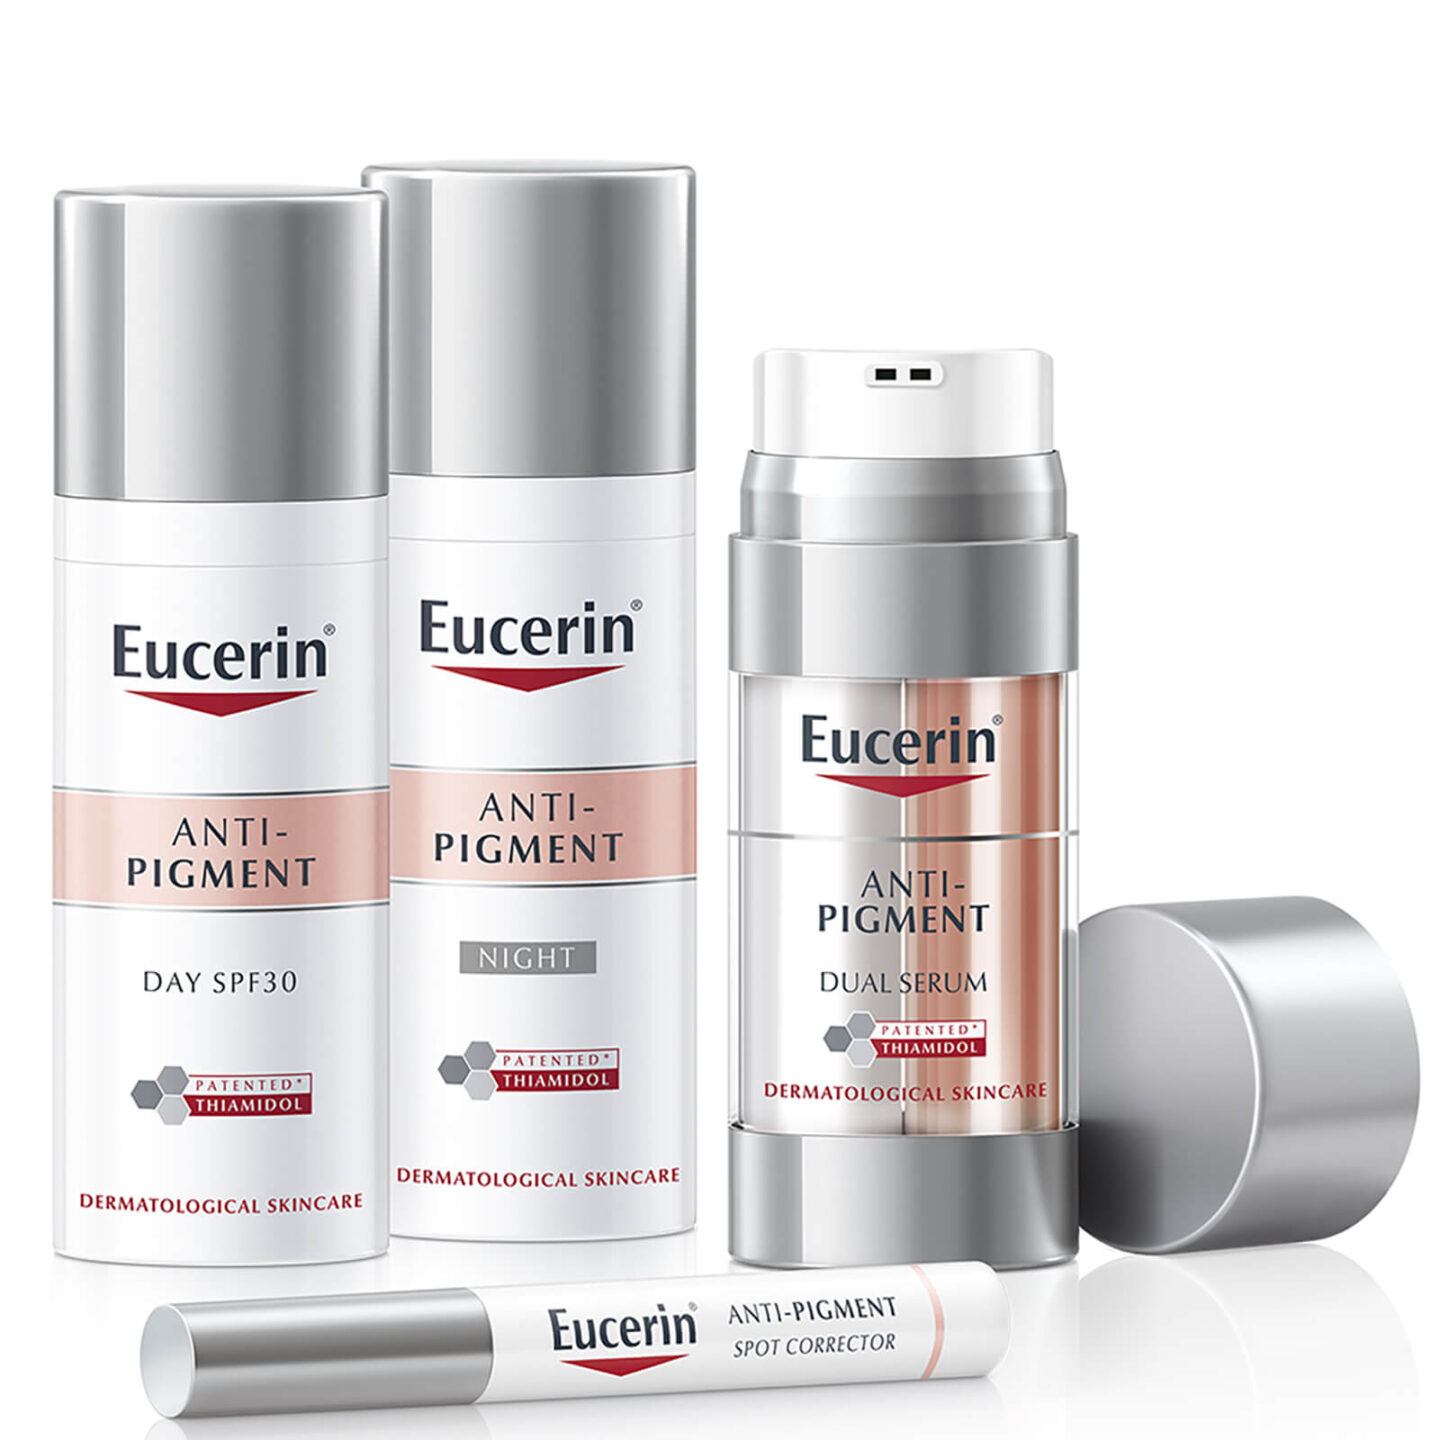 Dwell lejr frokost Eucerin Skincare Review: Does It Work | The Daily Struggle